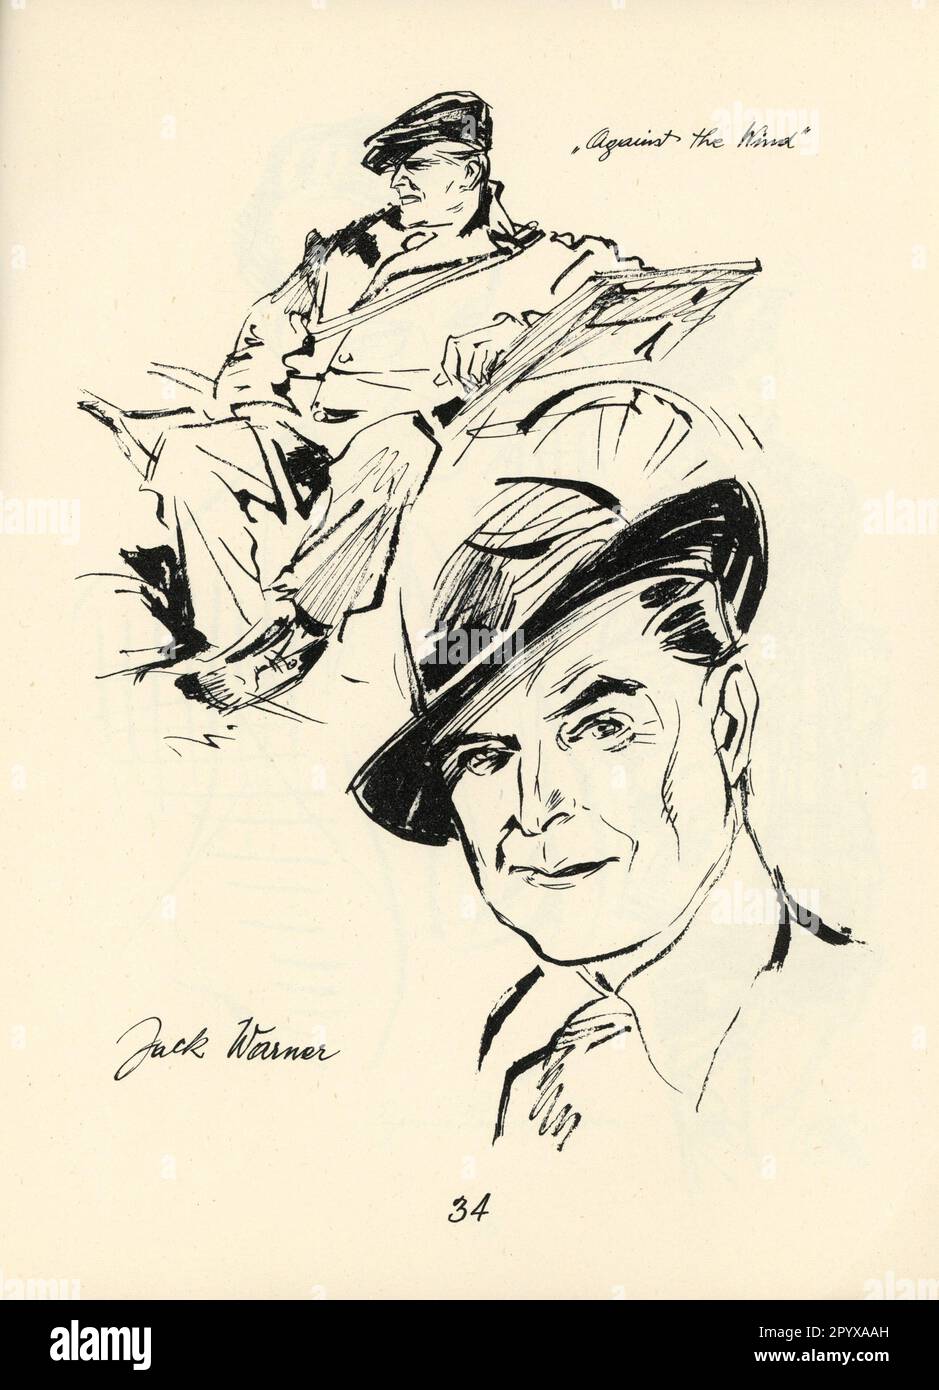 Caricature Portrait by EMIL WIESS of JACK WARNER in AGAINST THE WIND published in 1948. Stock Photo